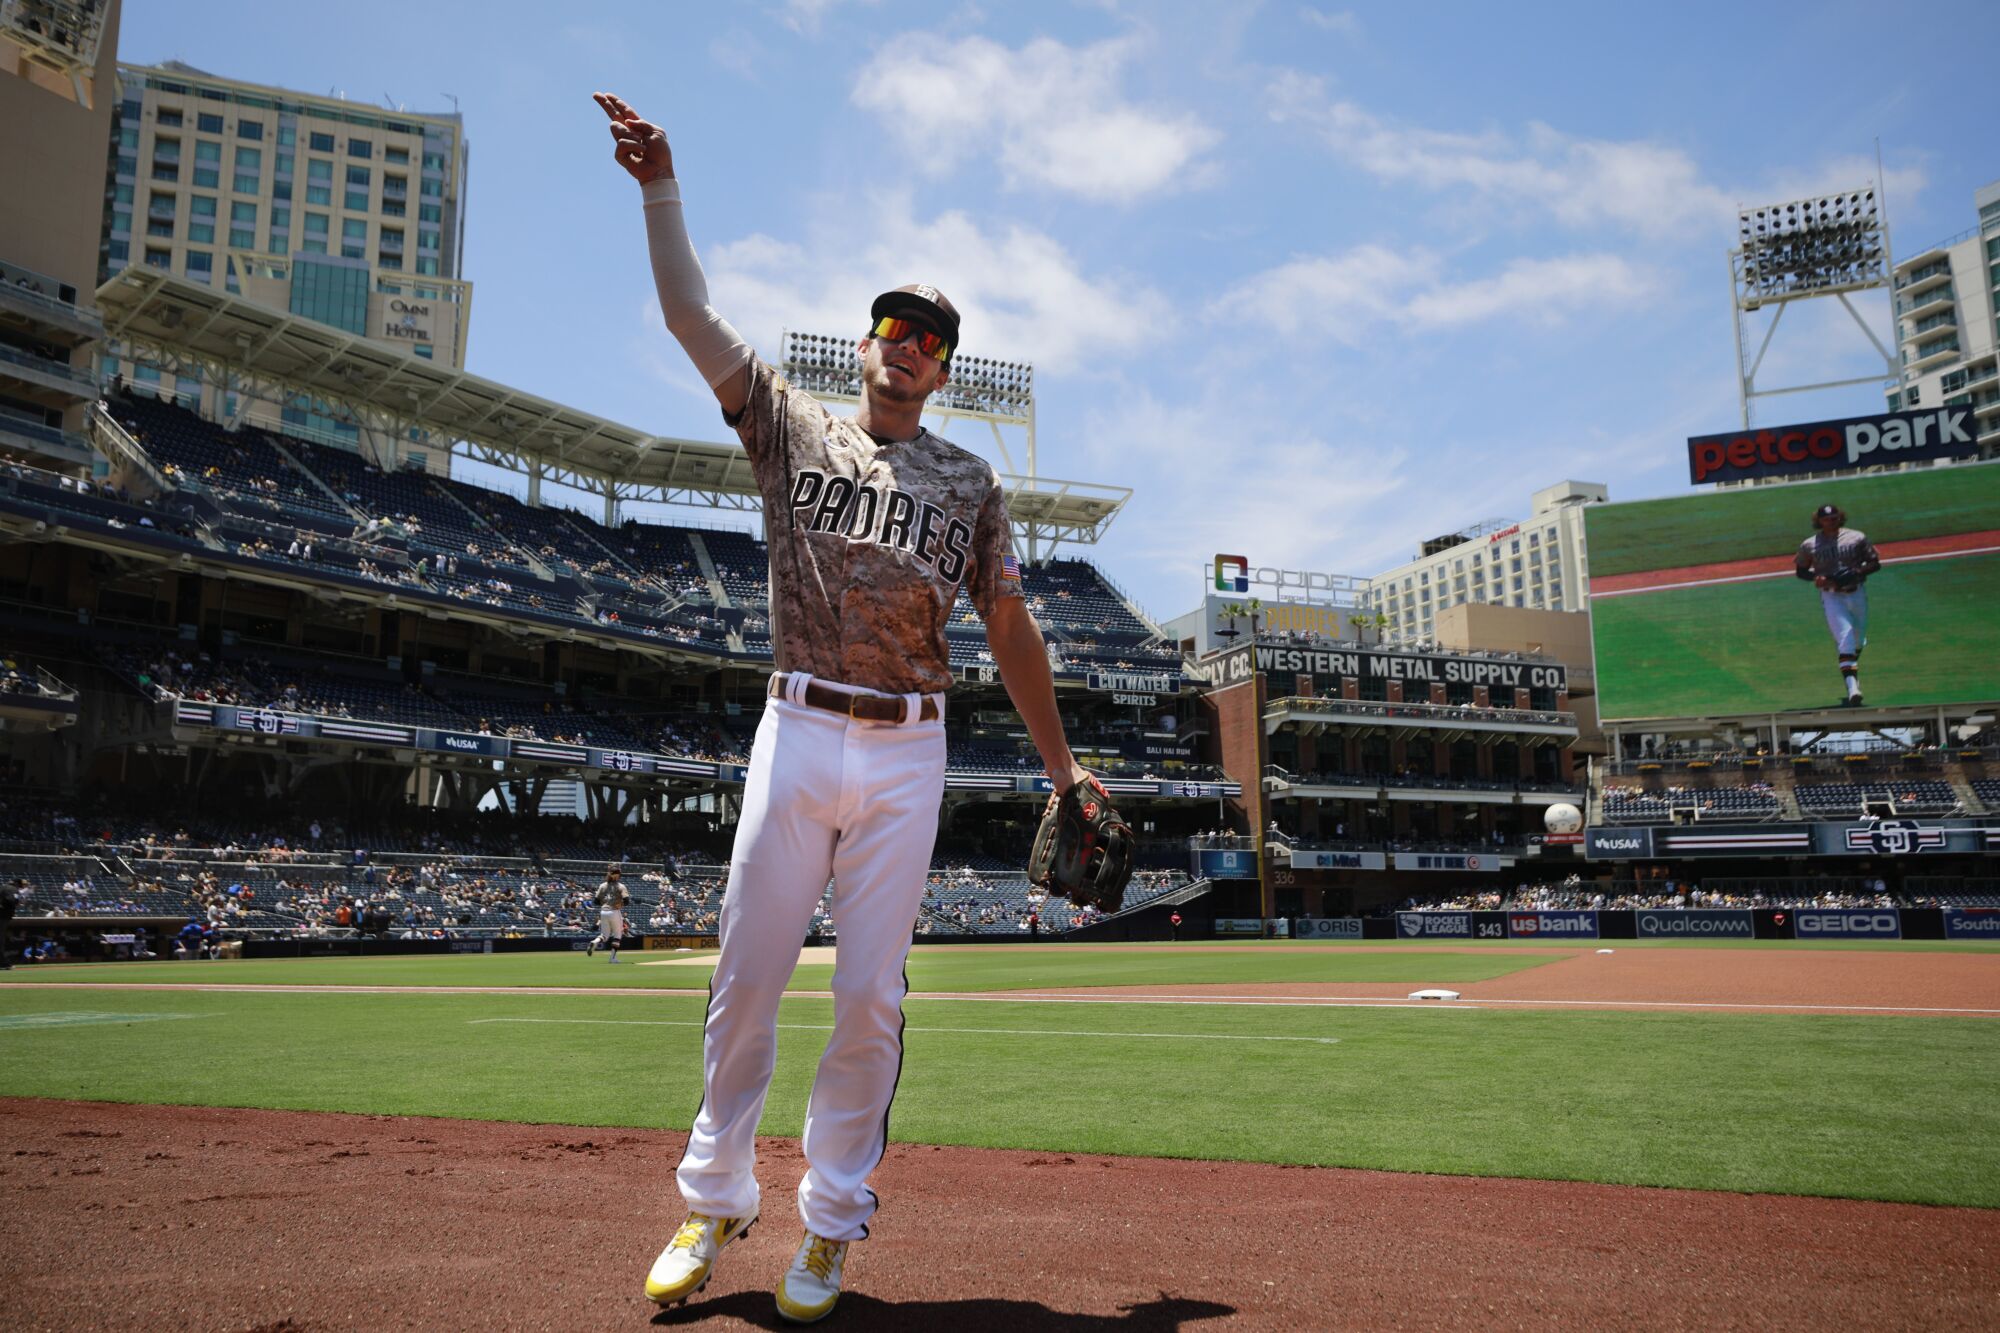 San Diego Padres' Wil Myers signals to fans as he takes the field to play.